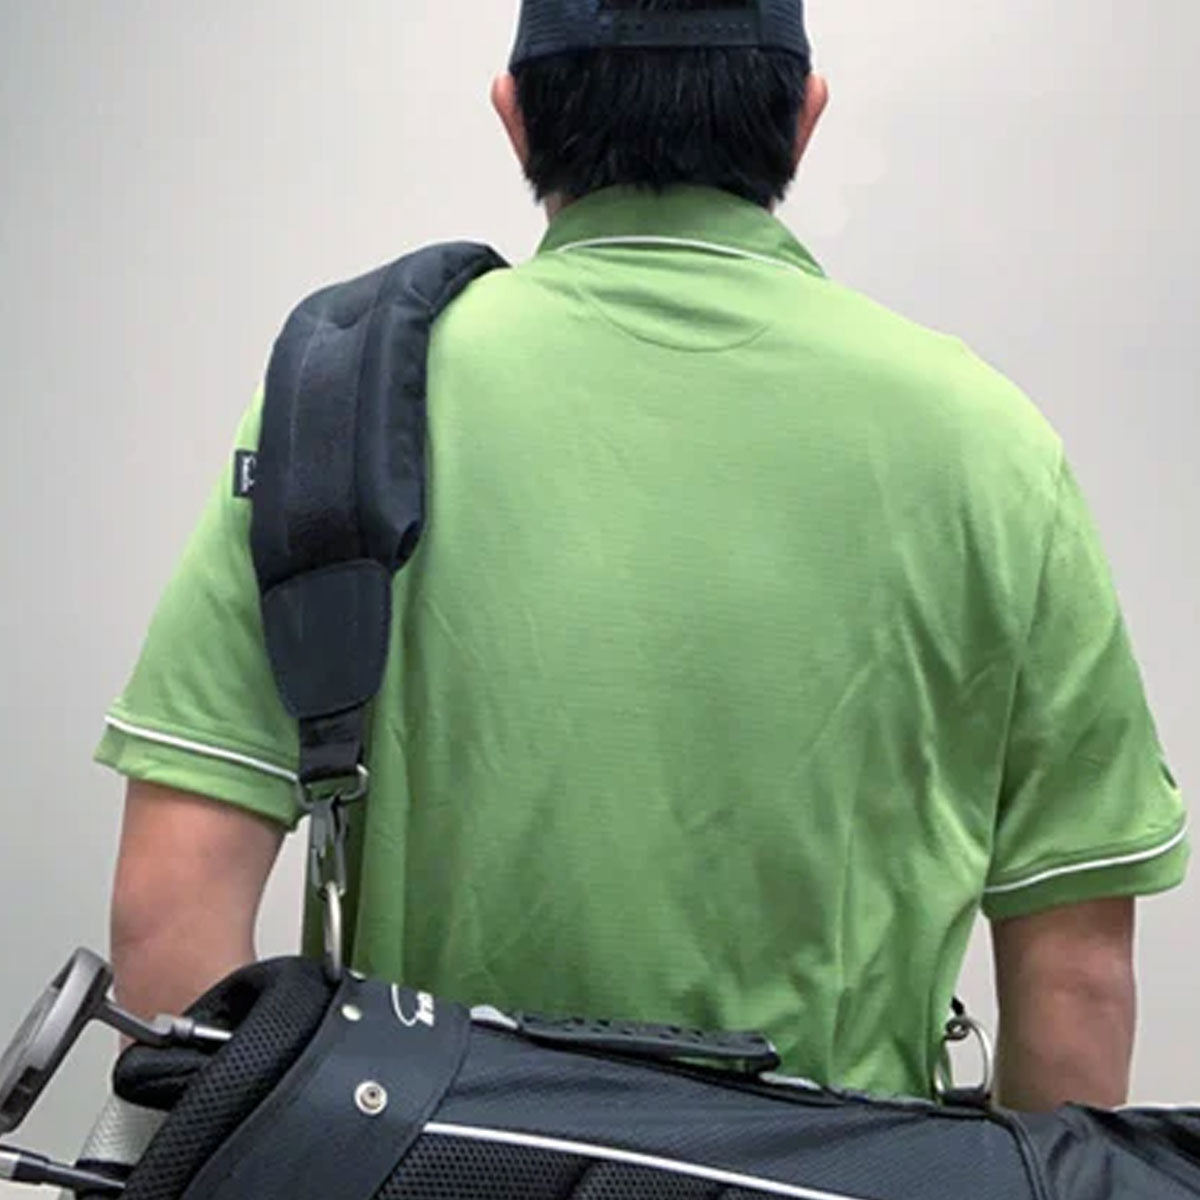 person carrying on their left shoulder an Intech Single Padded Adjustable Golf Bag Strap attached to a black golf bag